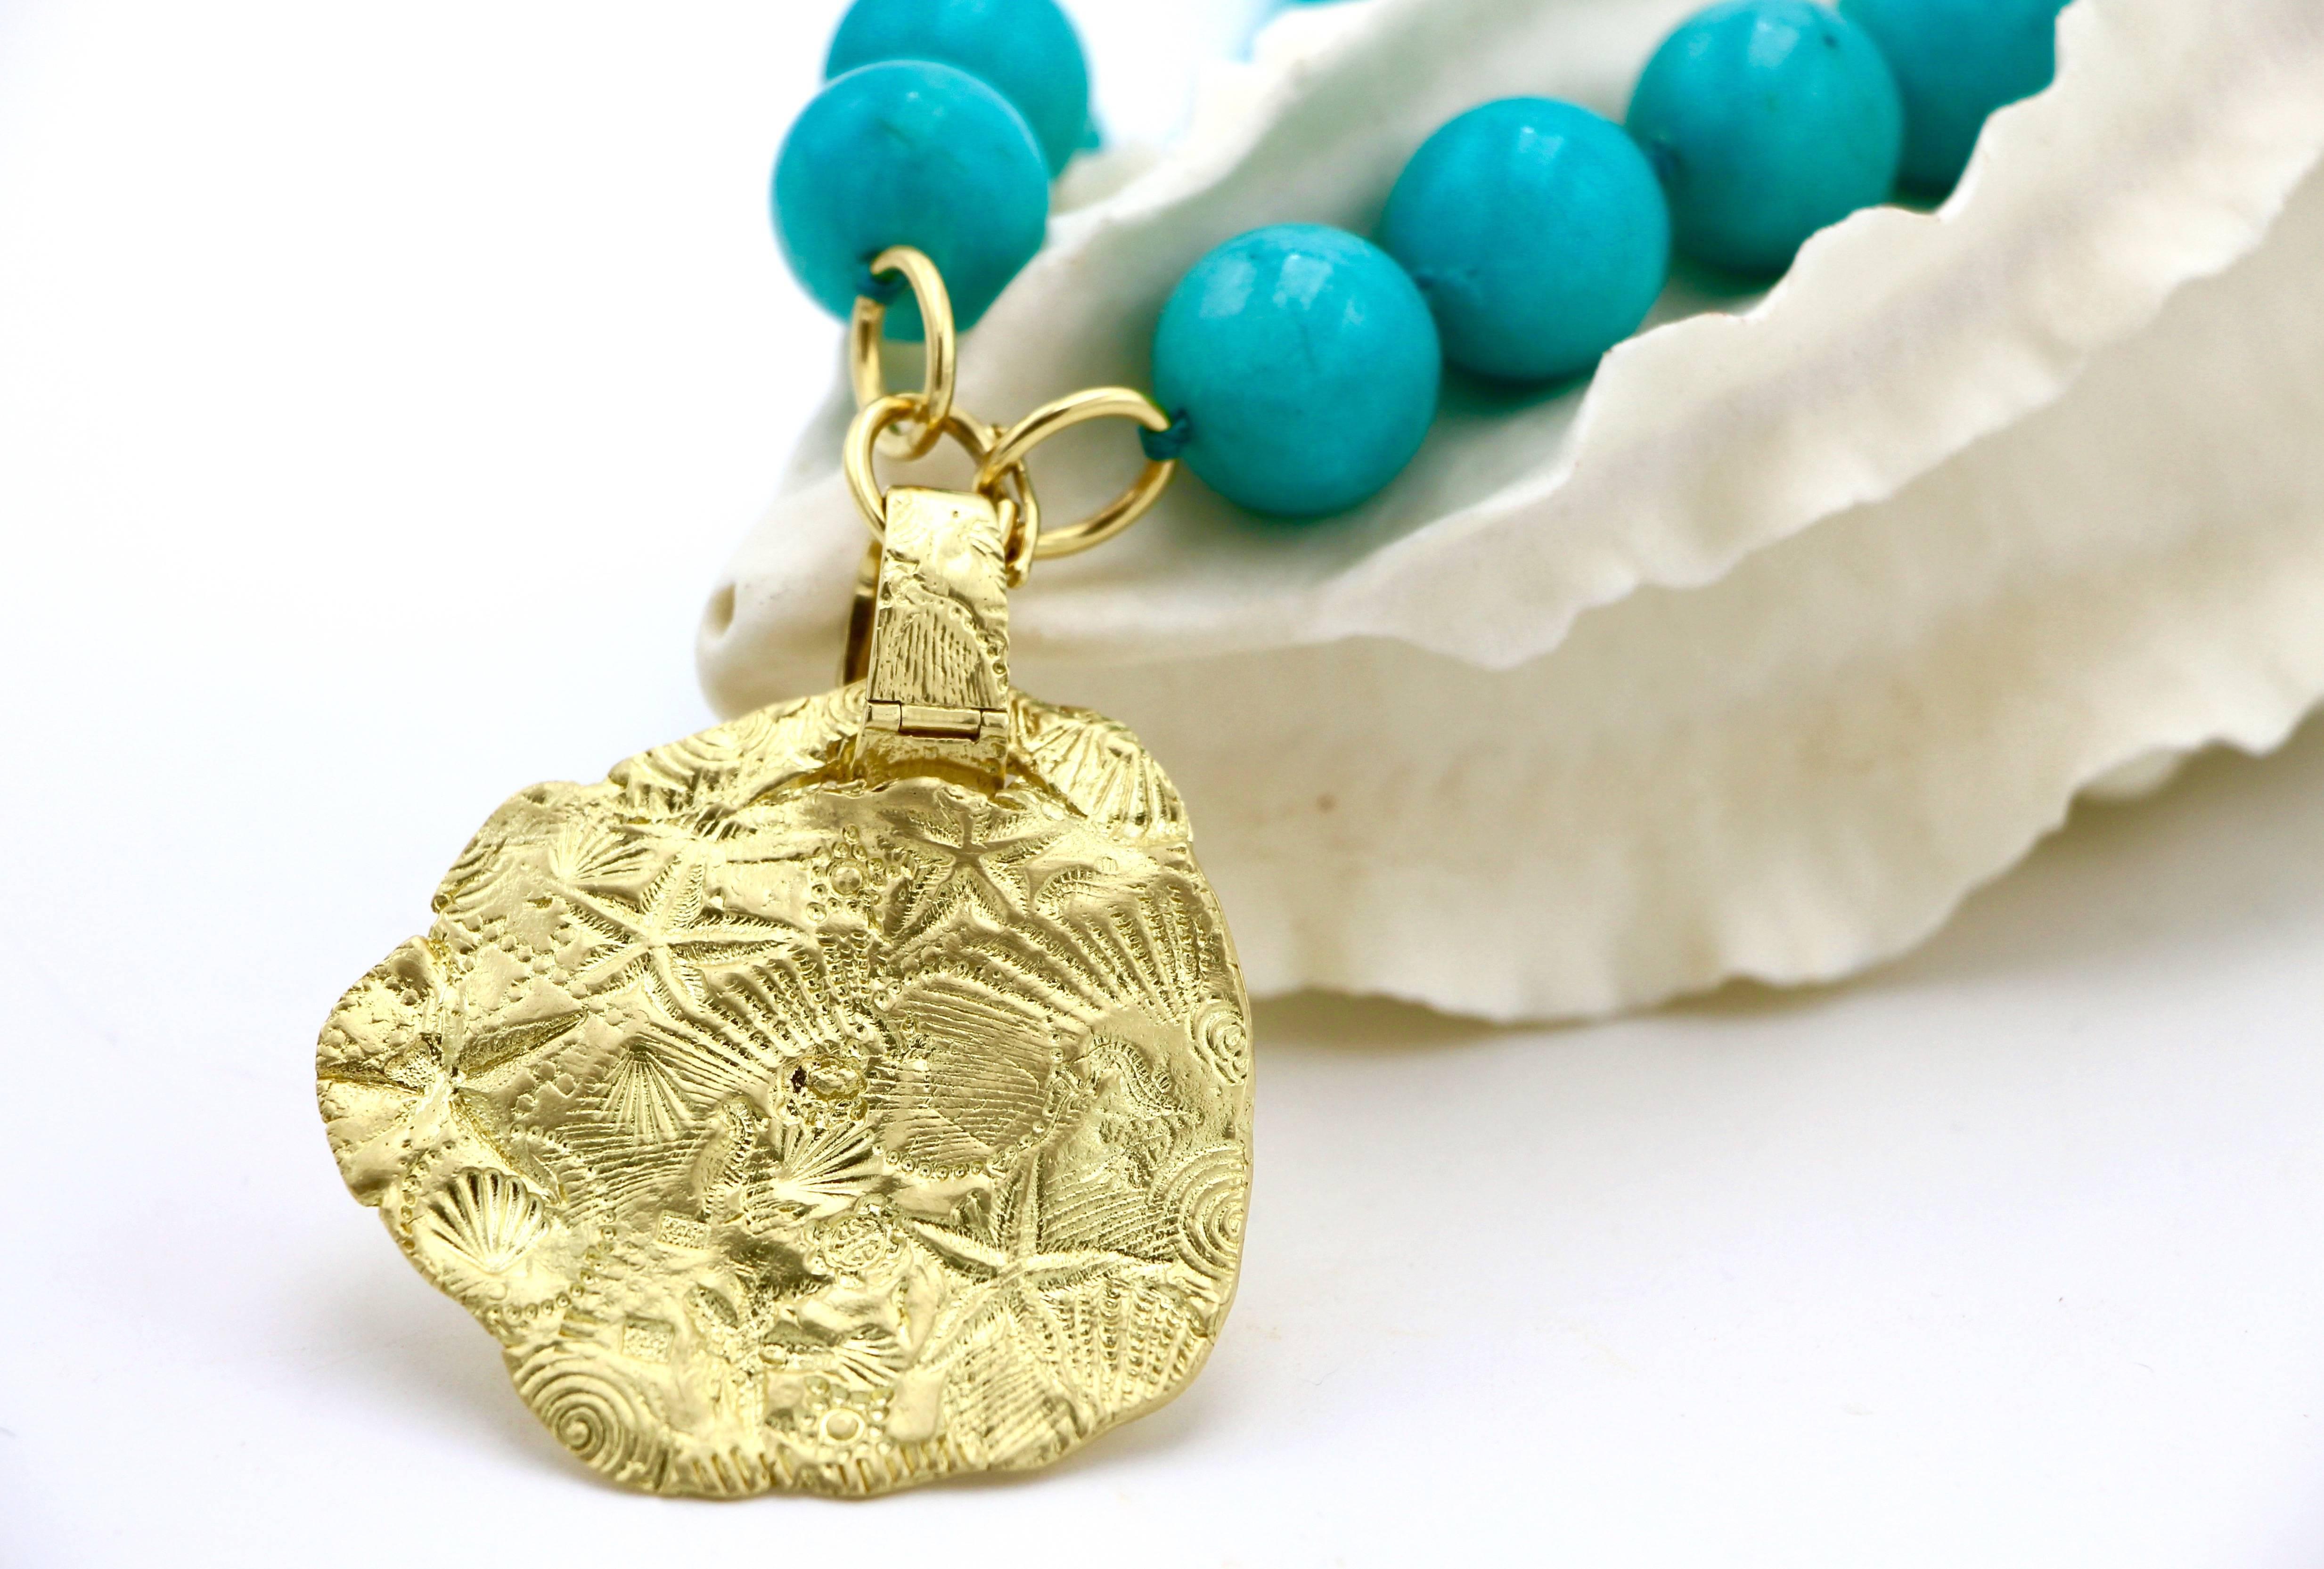 Inspired by her daughter, Susan Lister Locke created the 18 Karat Gold Ashley Pendant showcasing starfish and shells—treasures from the sea! Exquisitely detailed, the 18 Karat Gold clasp adds versatility and allows the pendant to be fastened onto a